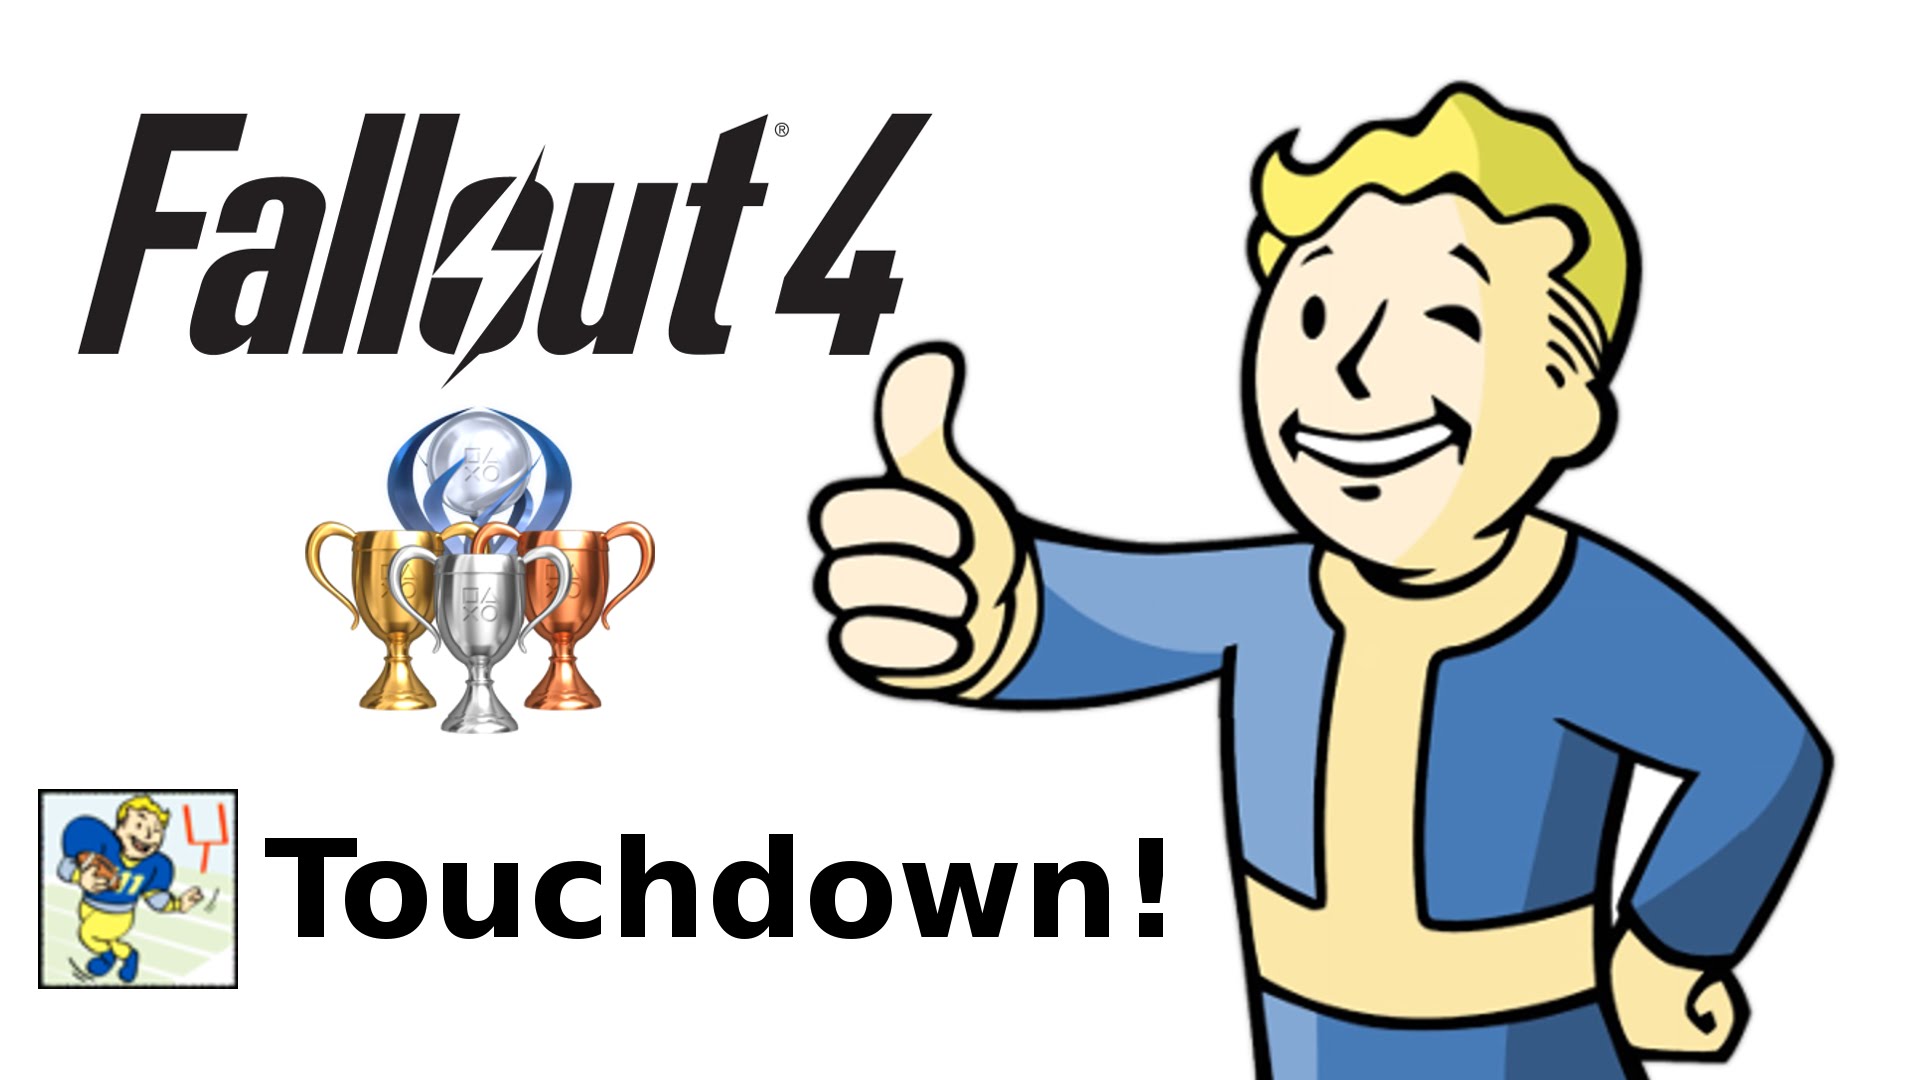 score a touchdown meaning fallout 4